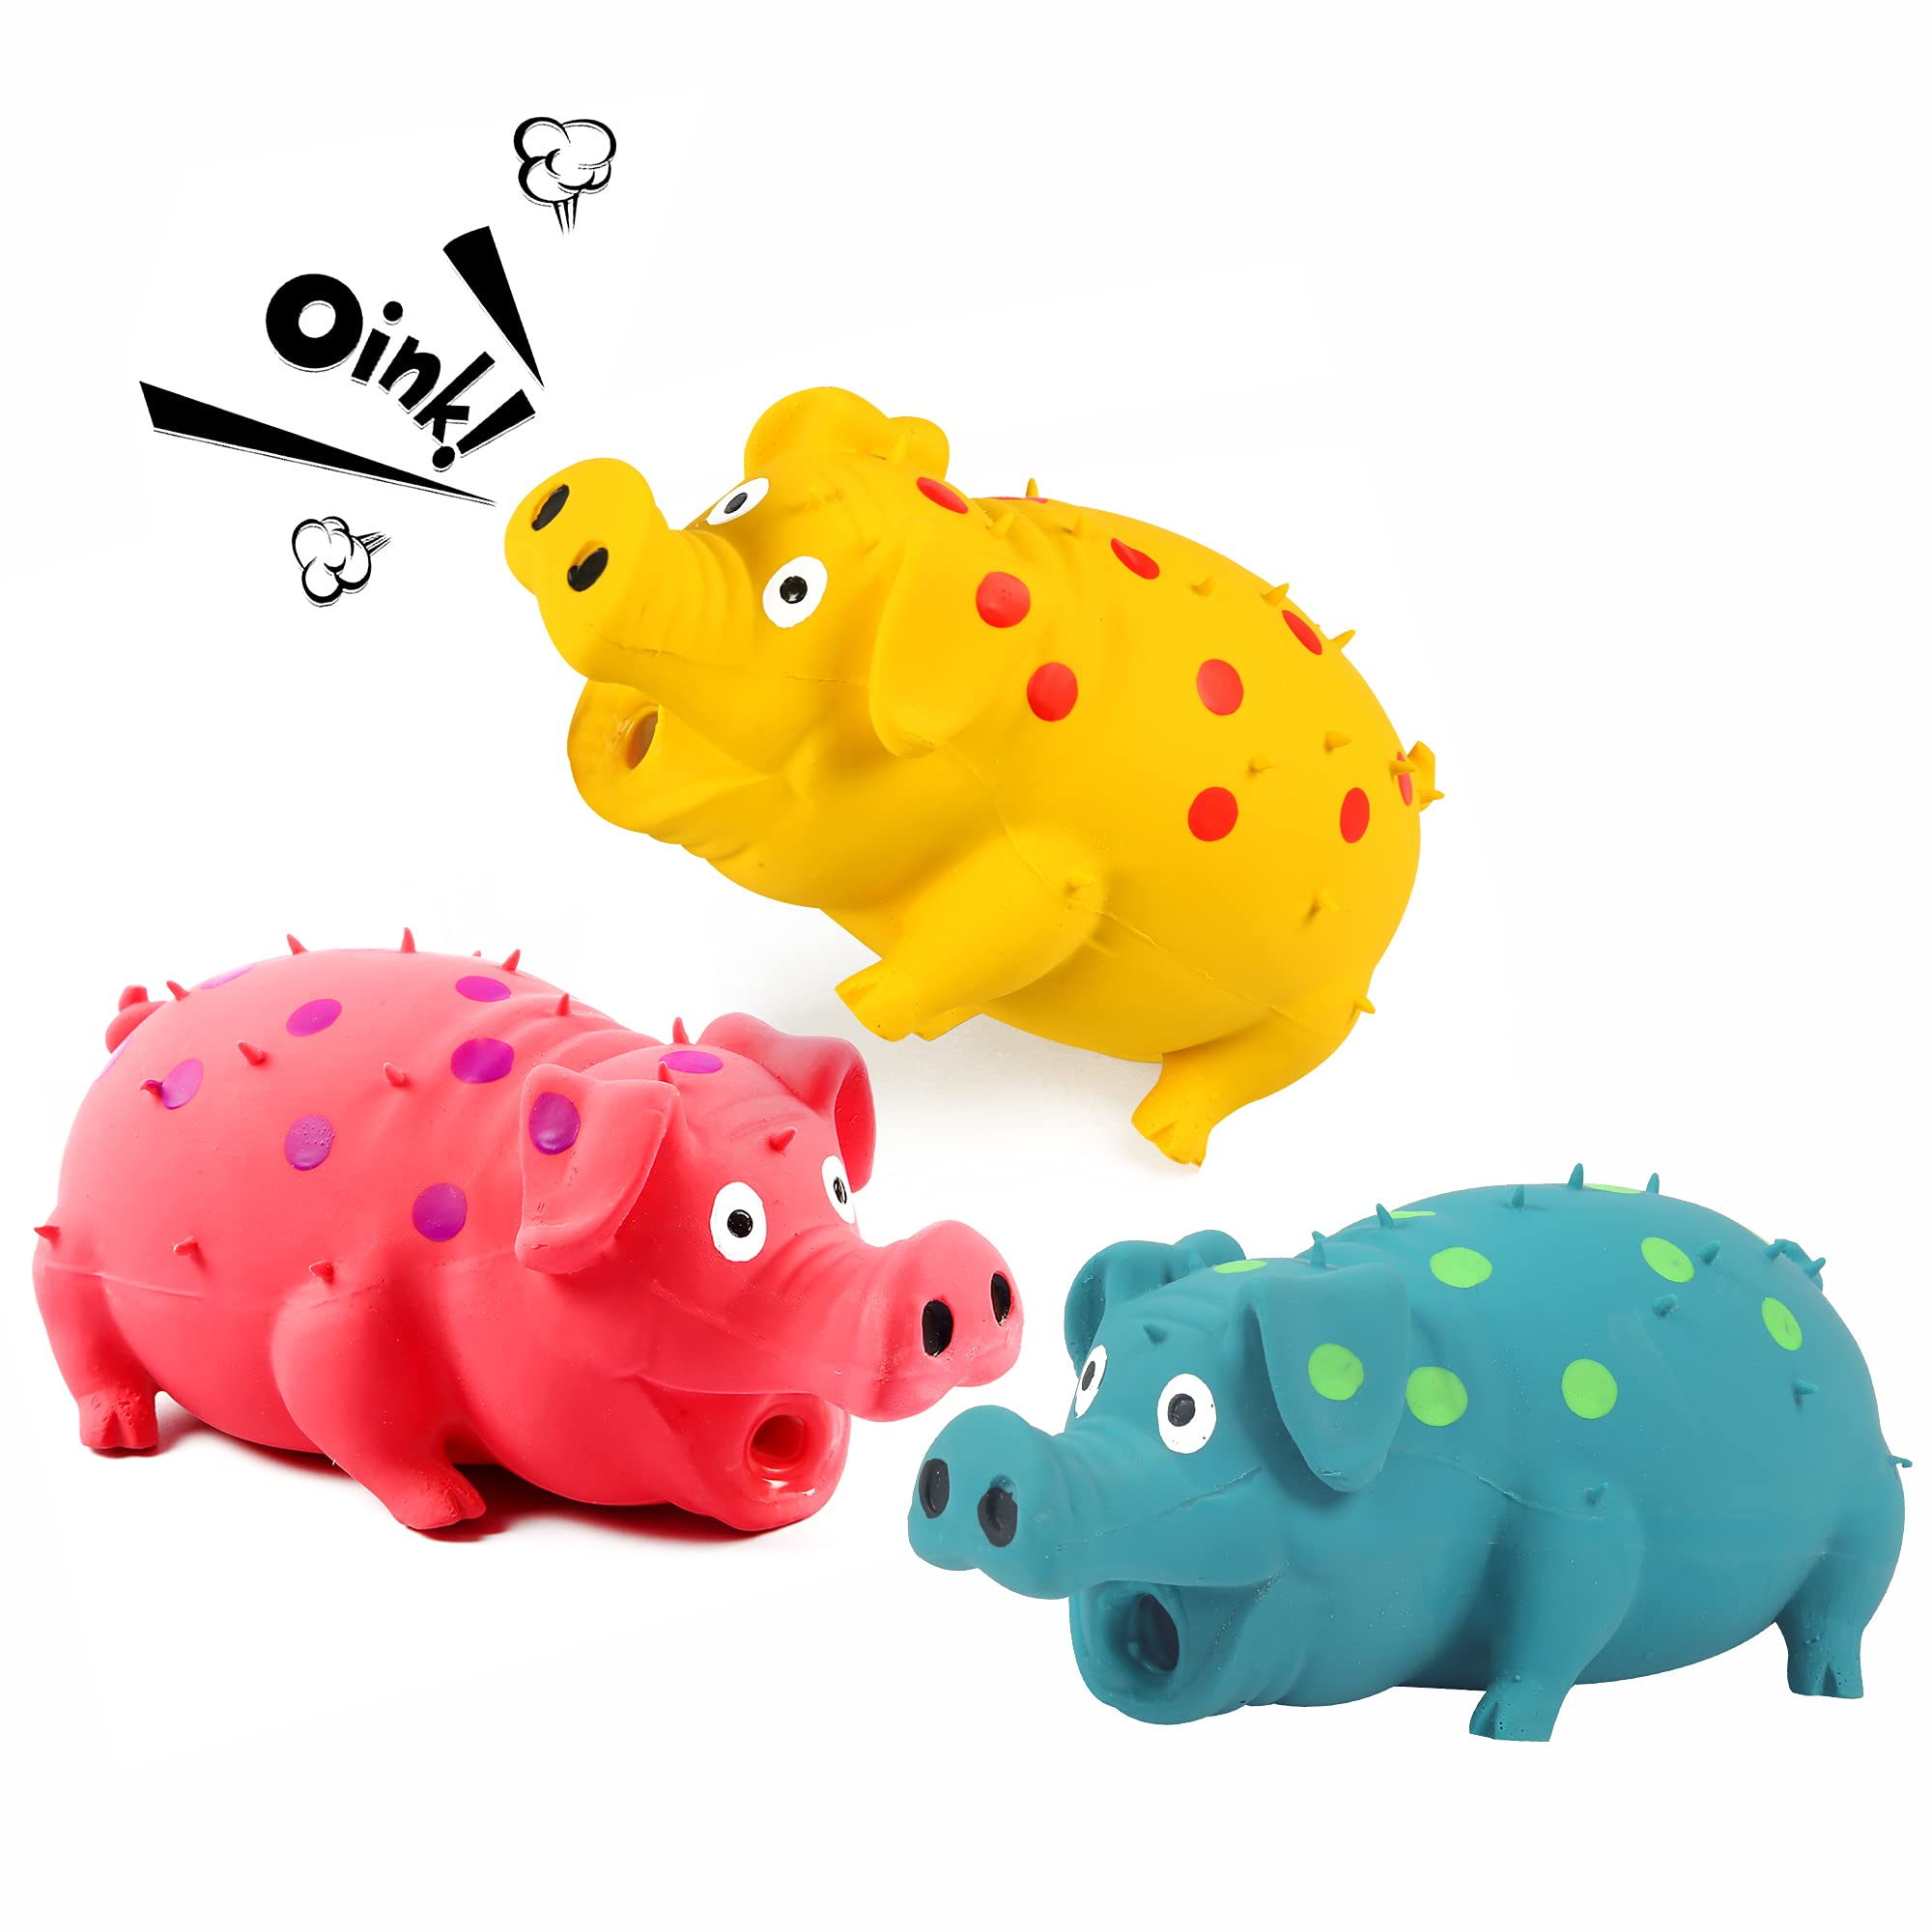 Grunting Pig Dog Toy That Oinks Grunts for Small Medium Large Dogs